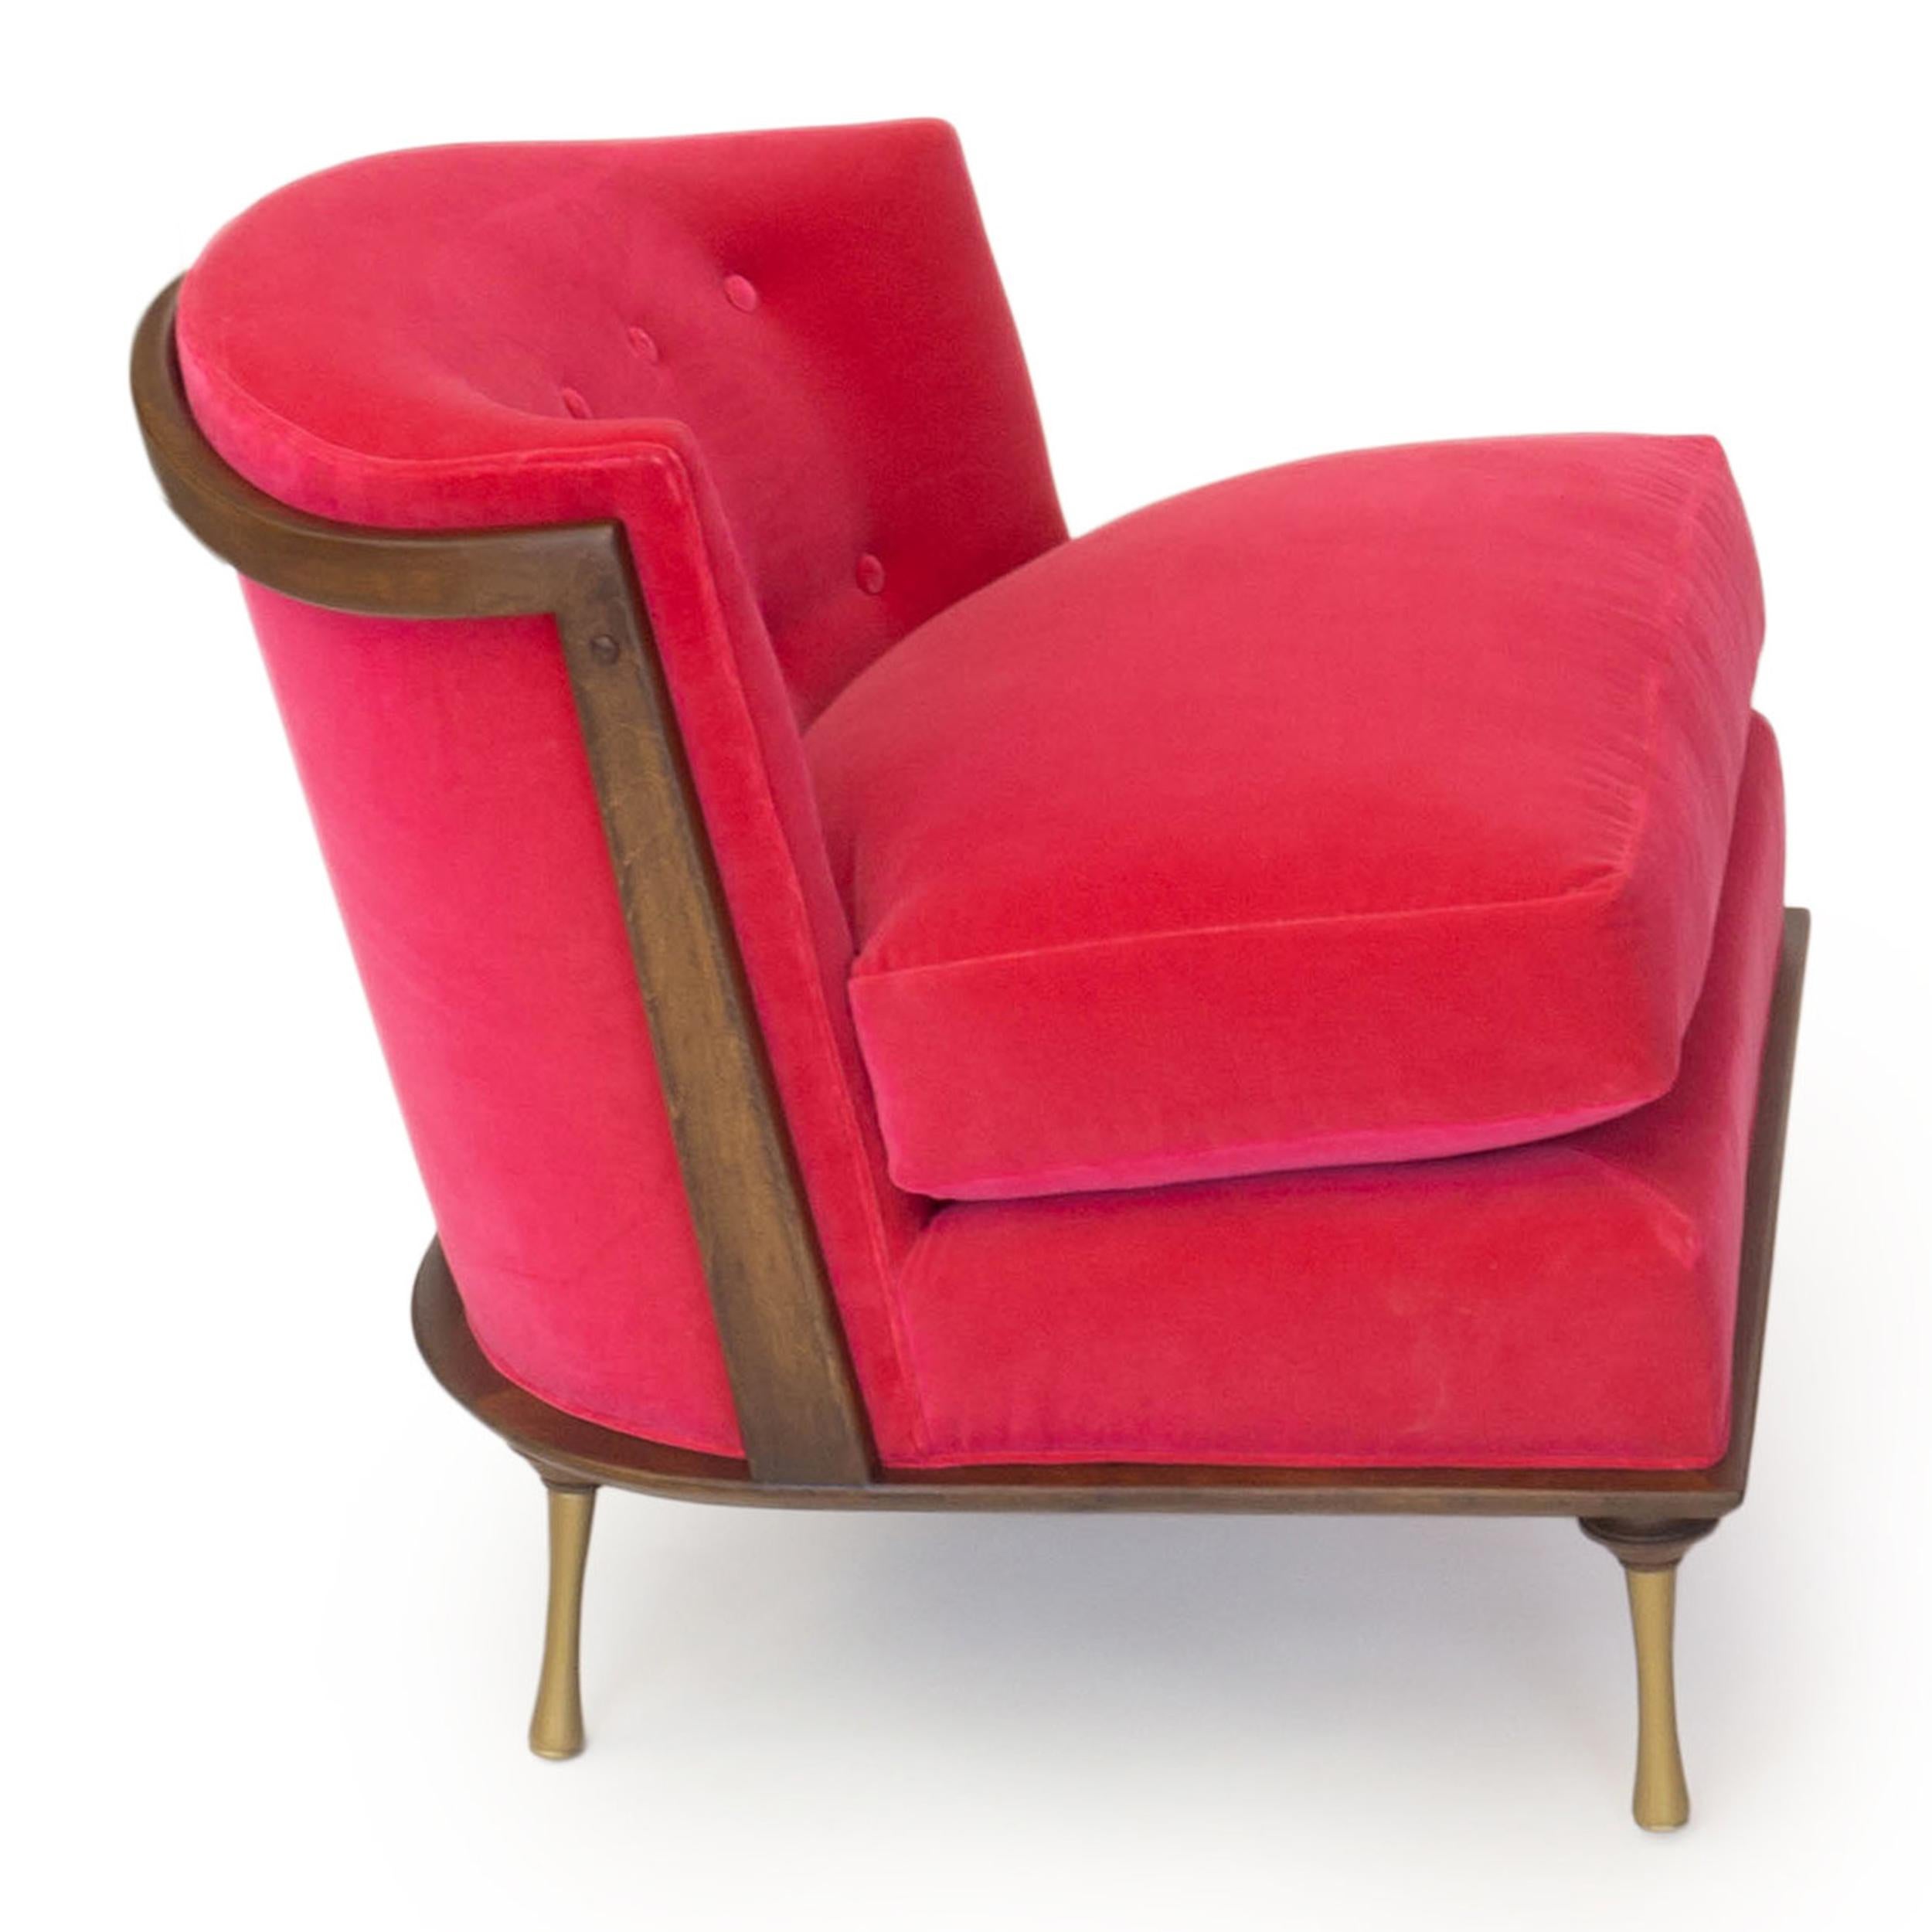 Contemporary Art Deco Inspired Slipper Chair For Sale